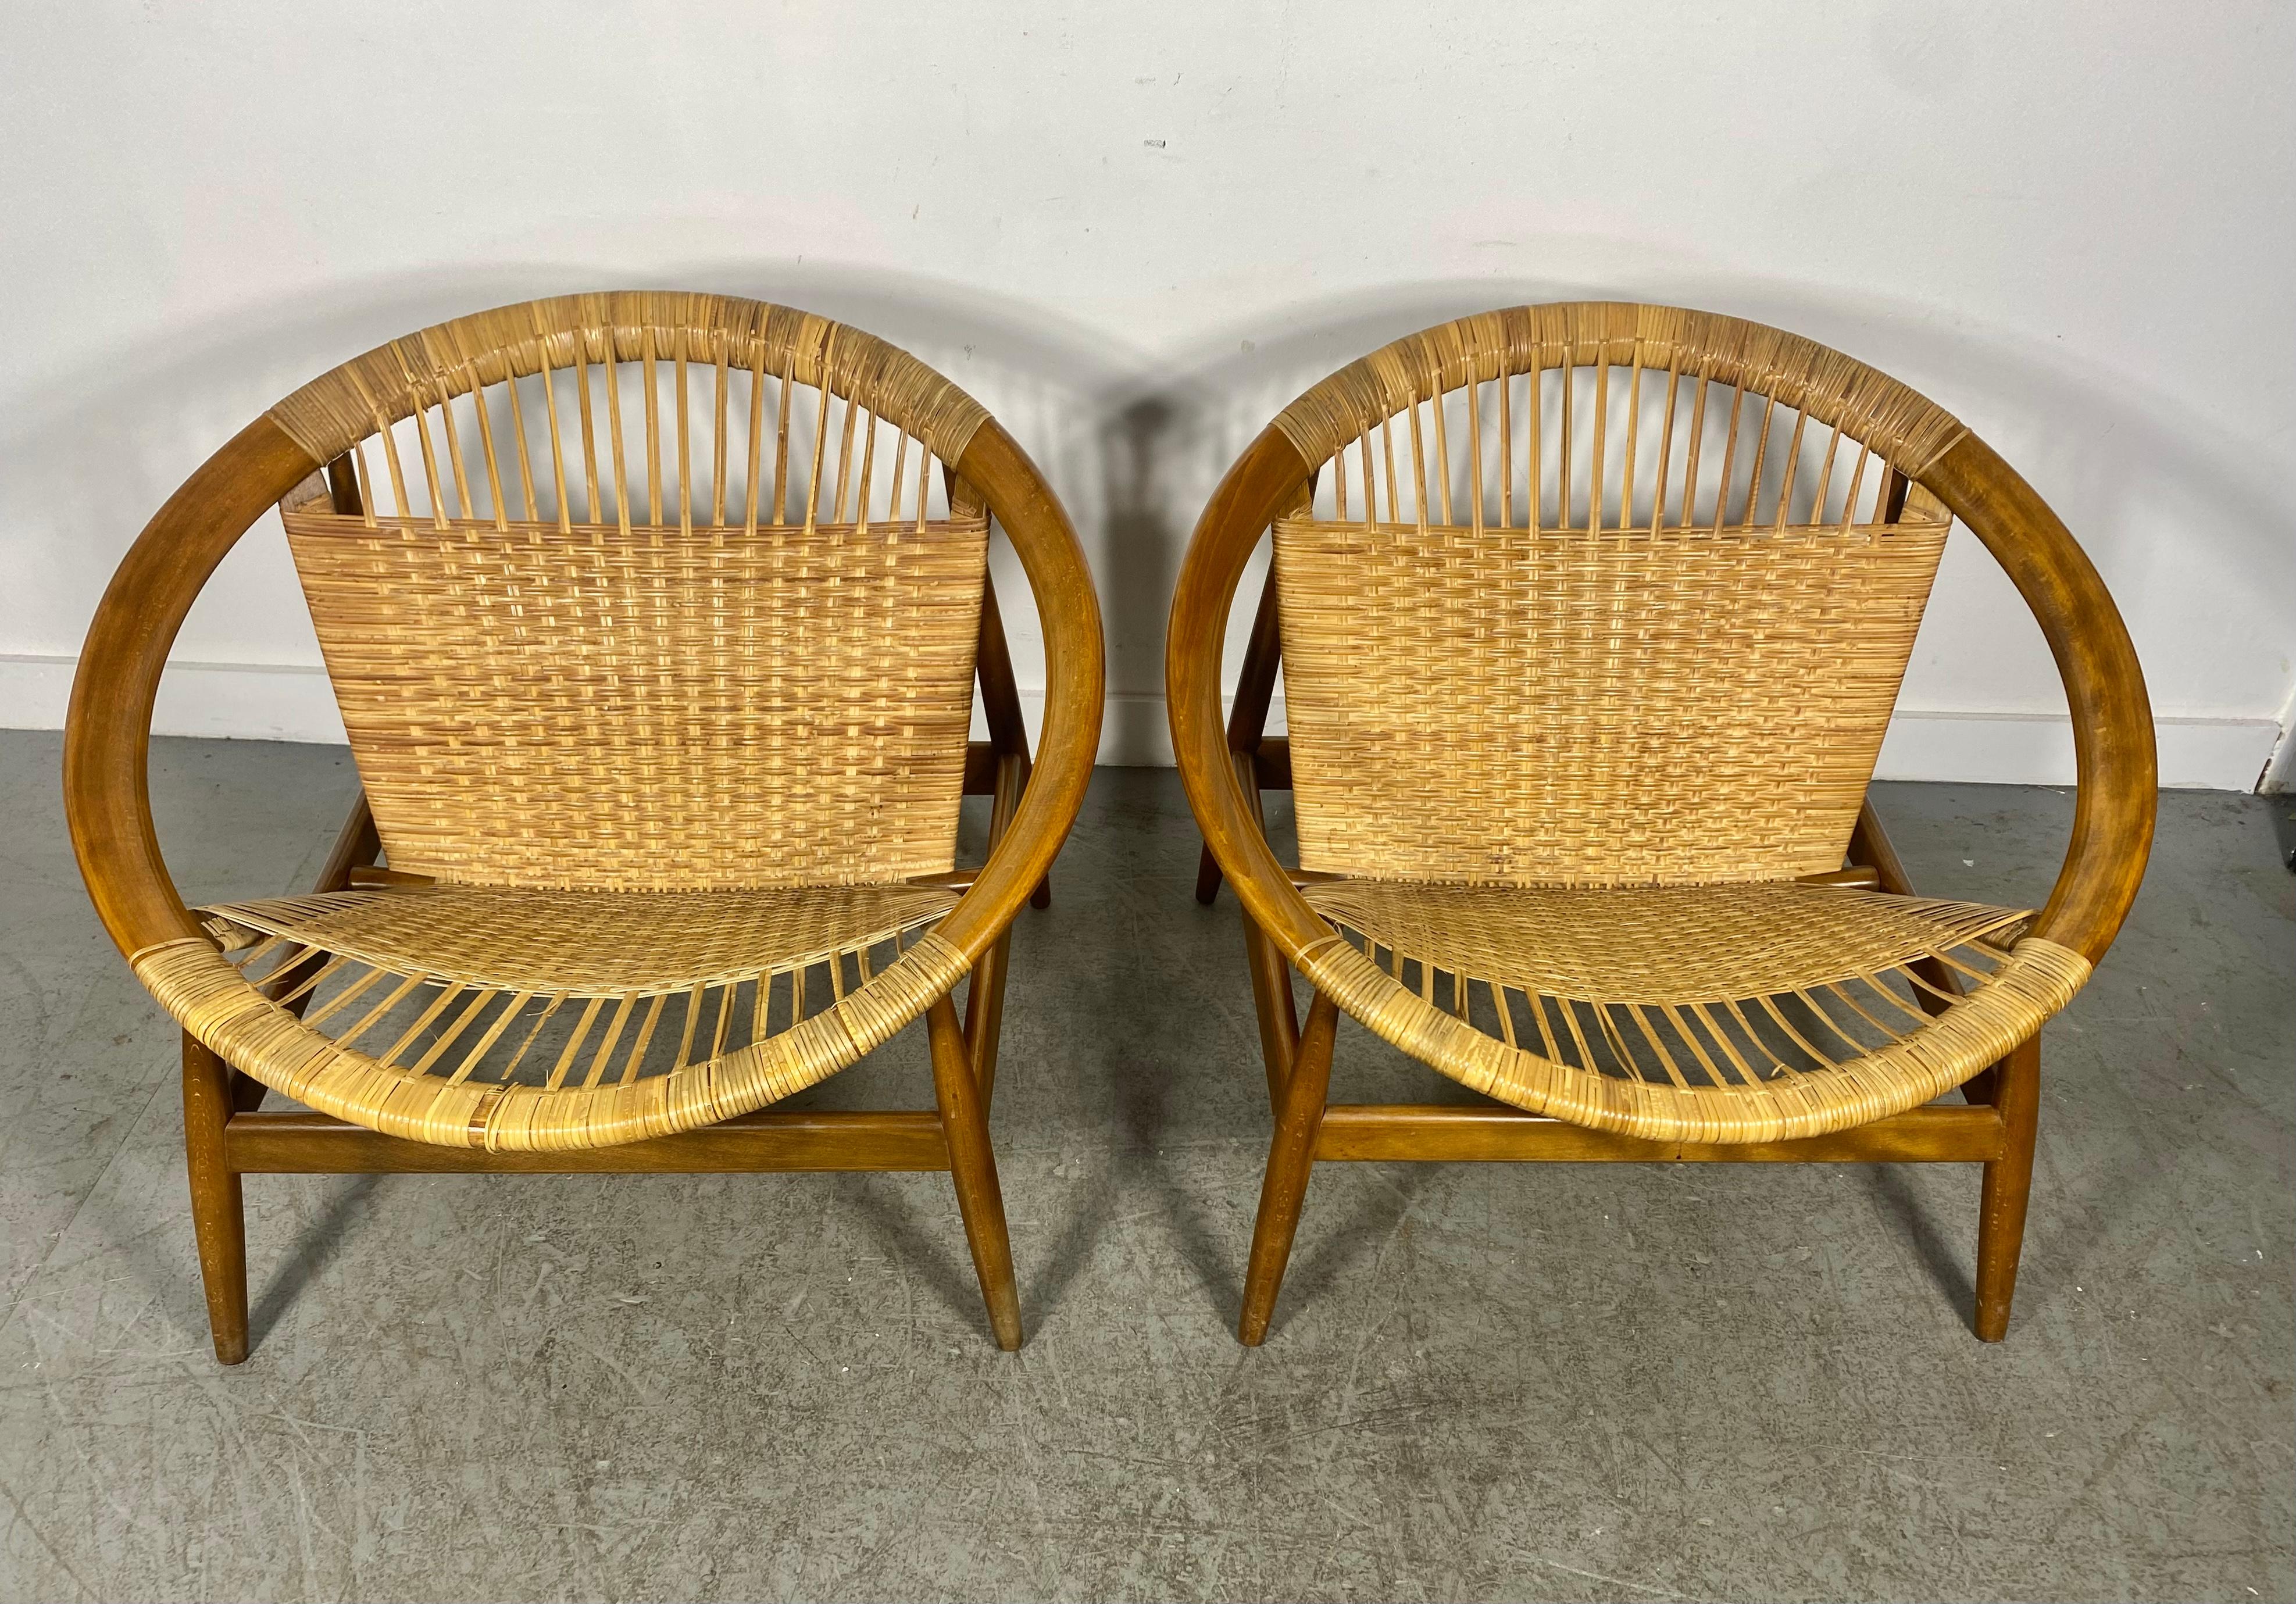 Stunning matched pair Ringstol Lounge Chair by Illum Wikkelsø,  woven wicker  seats and backs ..All original and untouched.wonderful original patina ,,finish, color,,, Red ink stamps, made in Denmark,,  Some minor wicker breaks..(see photo) .